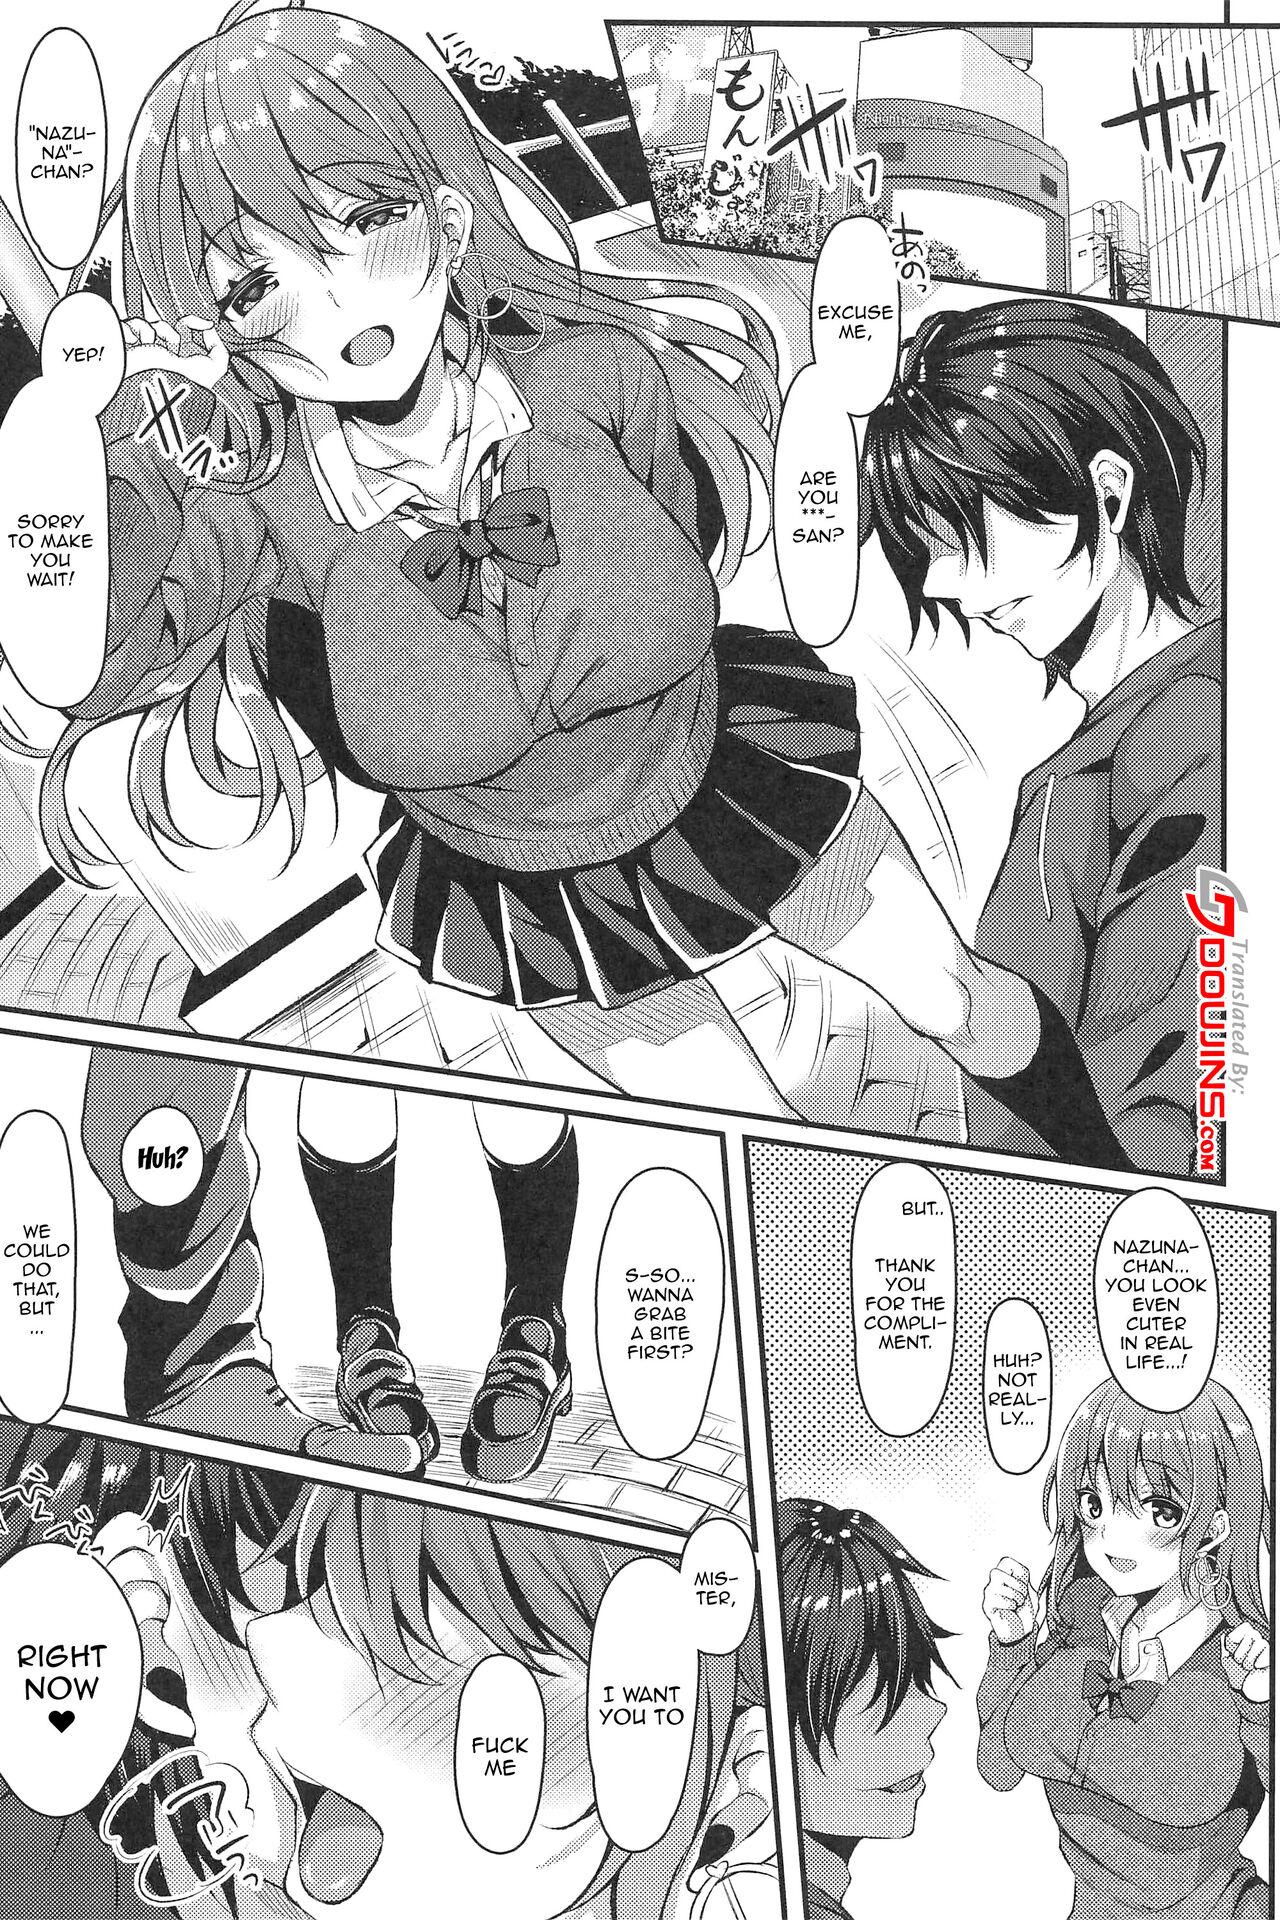 Tight Cunt Enkou JK ga NO1 Awahime ni Ochiru made | Until This Innocent Schoolgirl Ends Up Becoming The No.1 Sex Worker - Original Whooty - Page 3